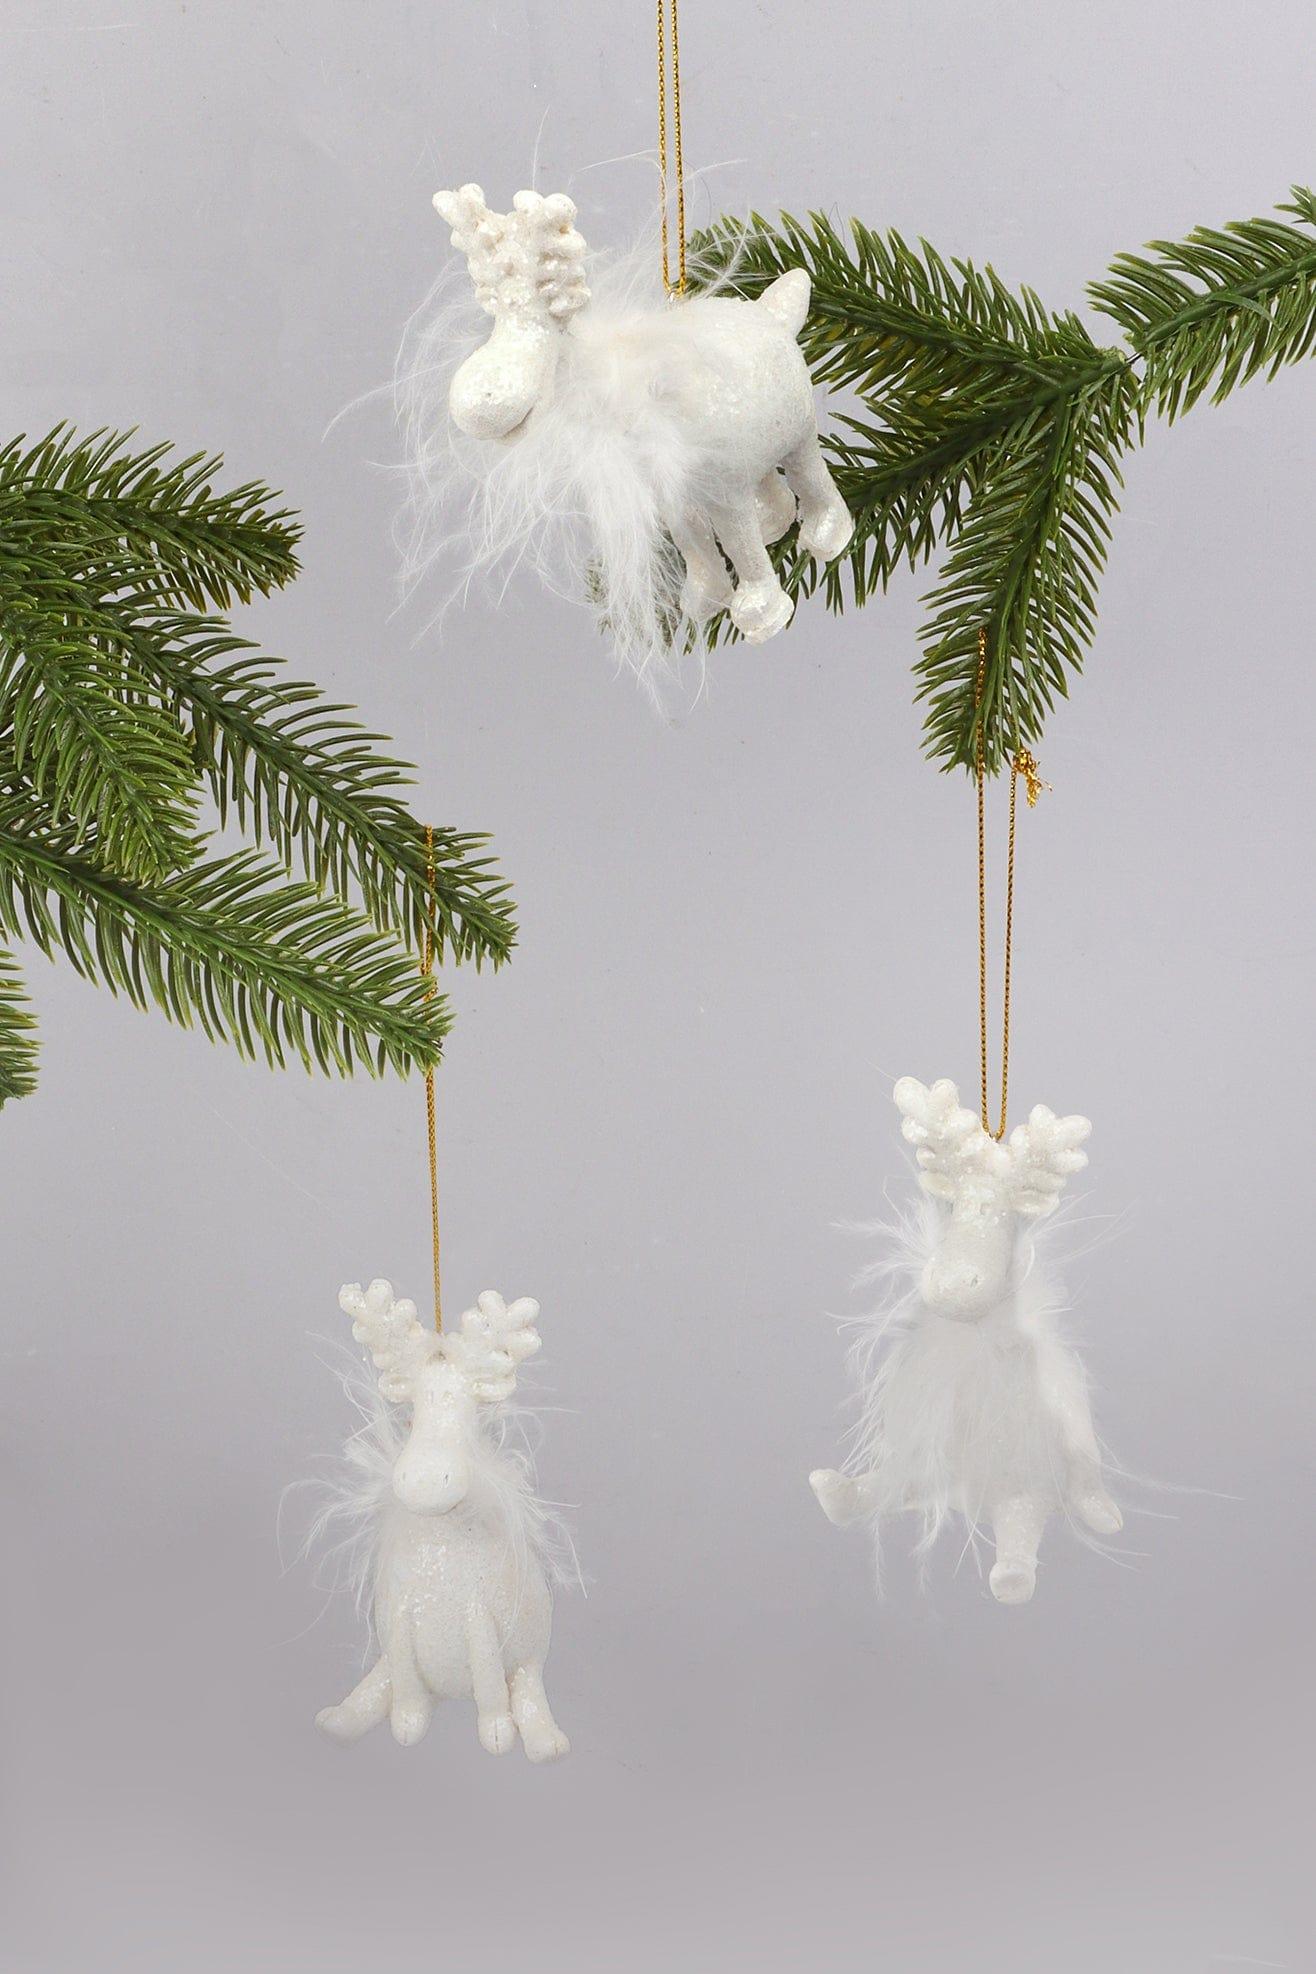 G Decor Christmas Decorations Glittery and Fluffy White Cartoon Reindeer Ornaments